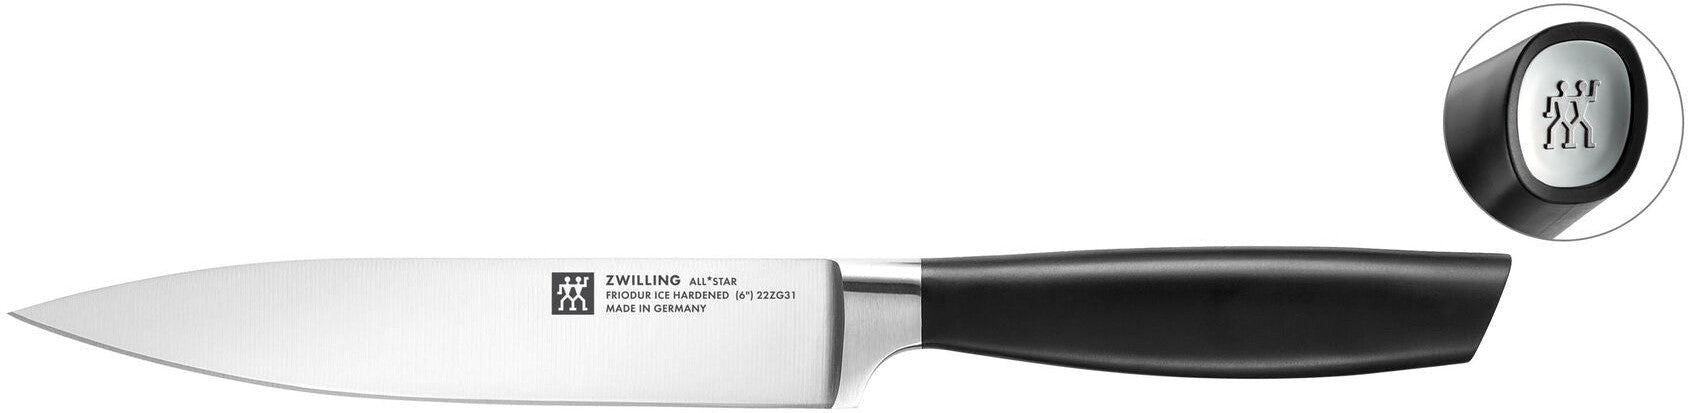 Zwilling - ALL * STAR 6" Carving Knife, Silver - 1020796